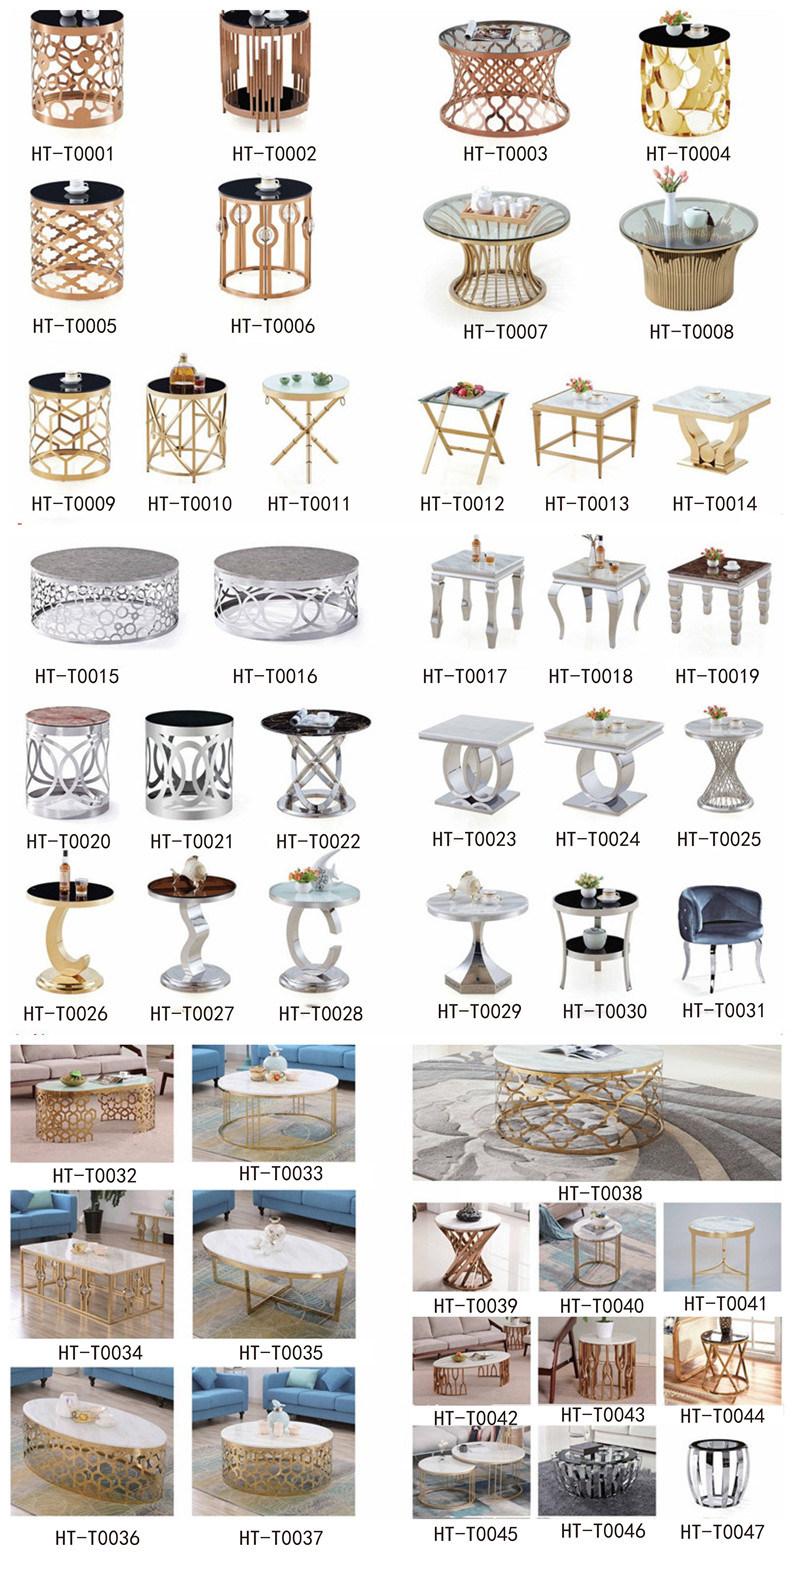 Smart Electric Side Table Wooden Table/Placement/Computer Table Living Room Furniture Dining Simple Leisure Restaurant Sofa Chair Table Sets